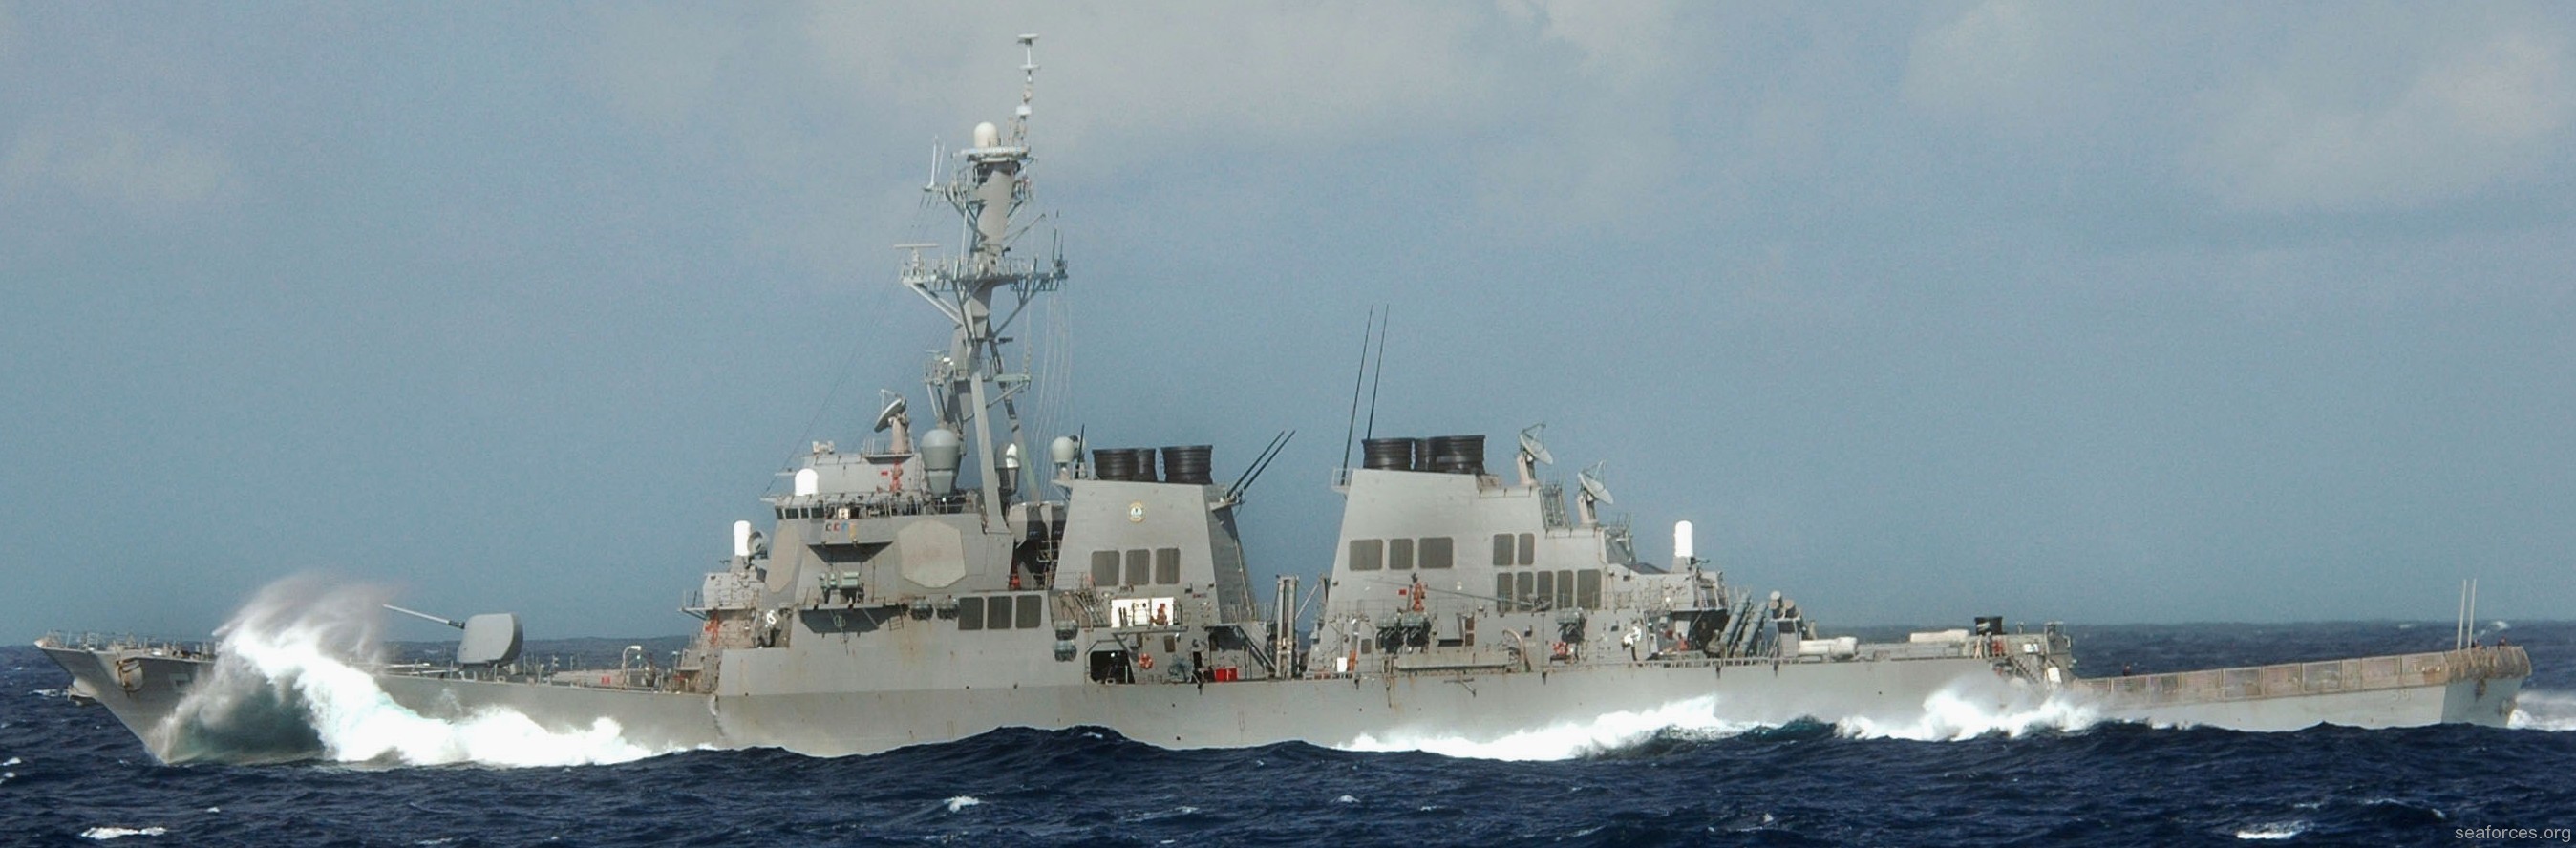 ddg-59 uss russell guided missile destroyer us navy 38 indian ocean